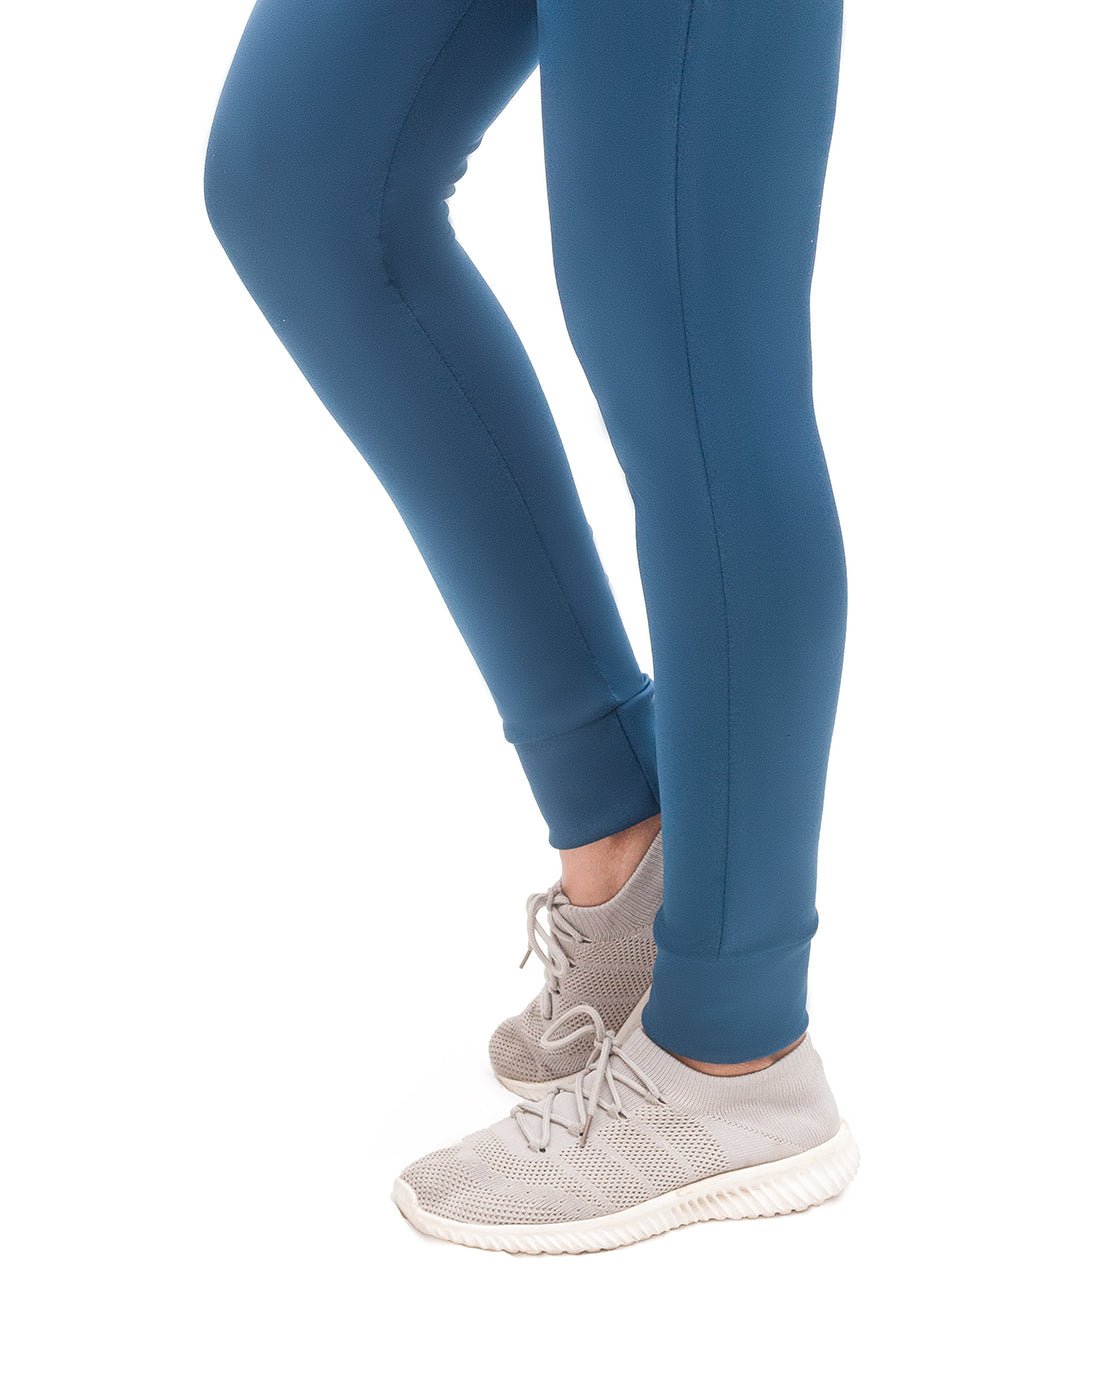 High Waist Tapered Joggers With Mobile Pocket For Women Ideal For Running,  Yoga, Gym And Workouts From Changbo1985, $20.53